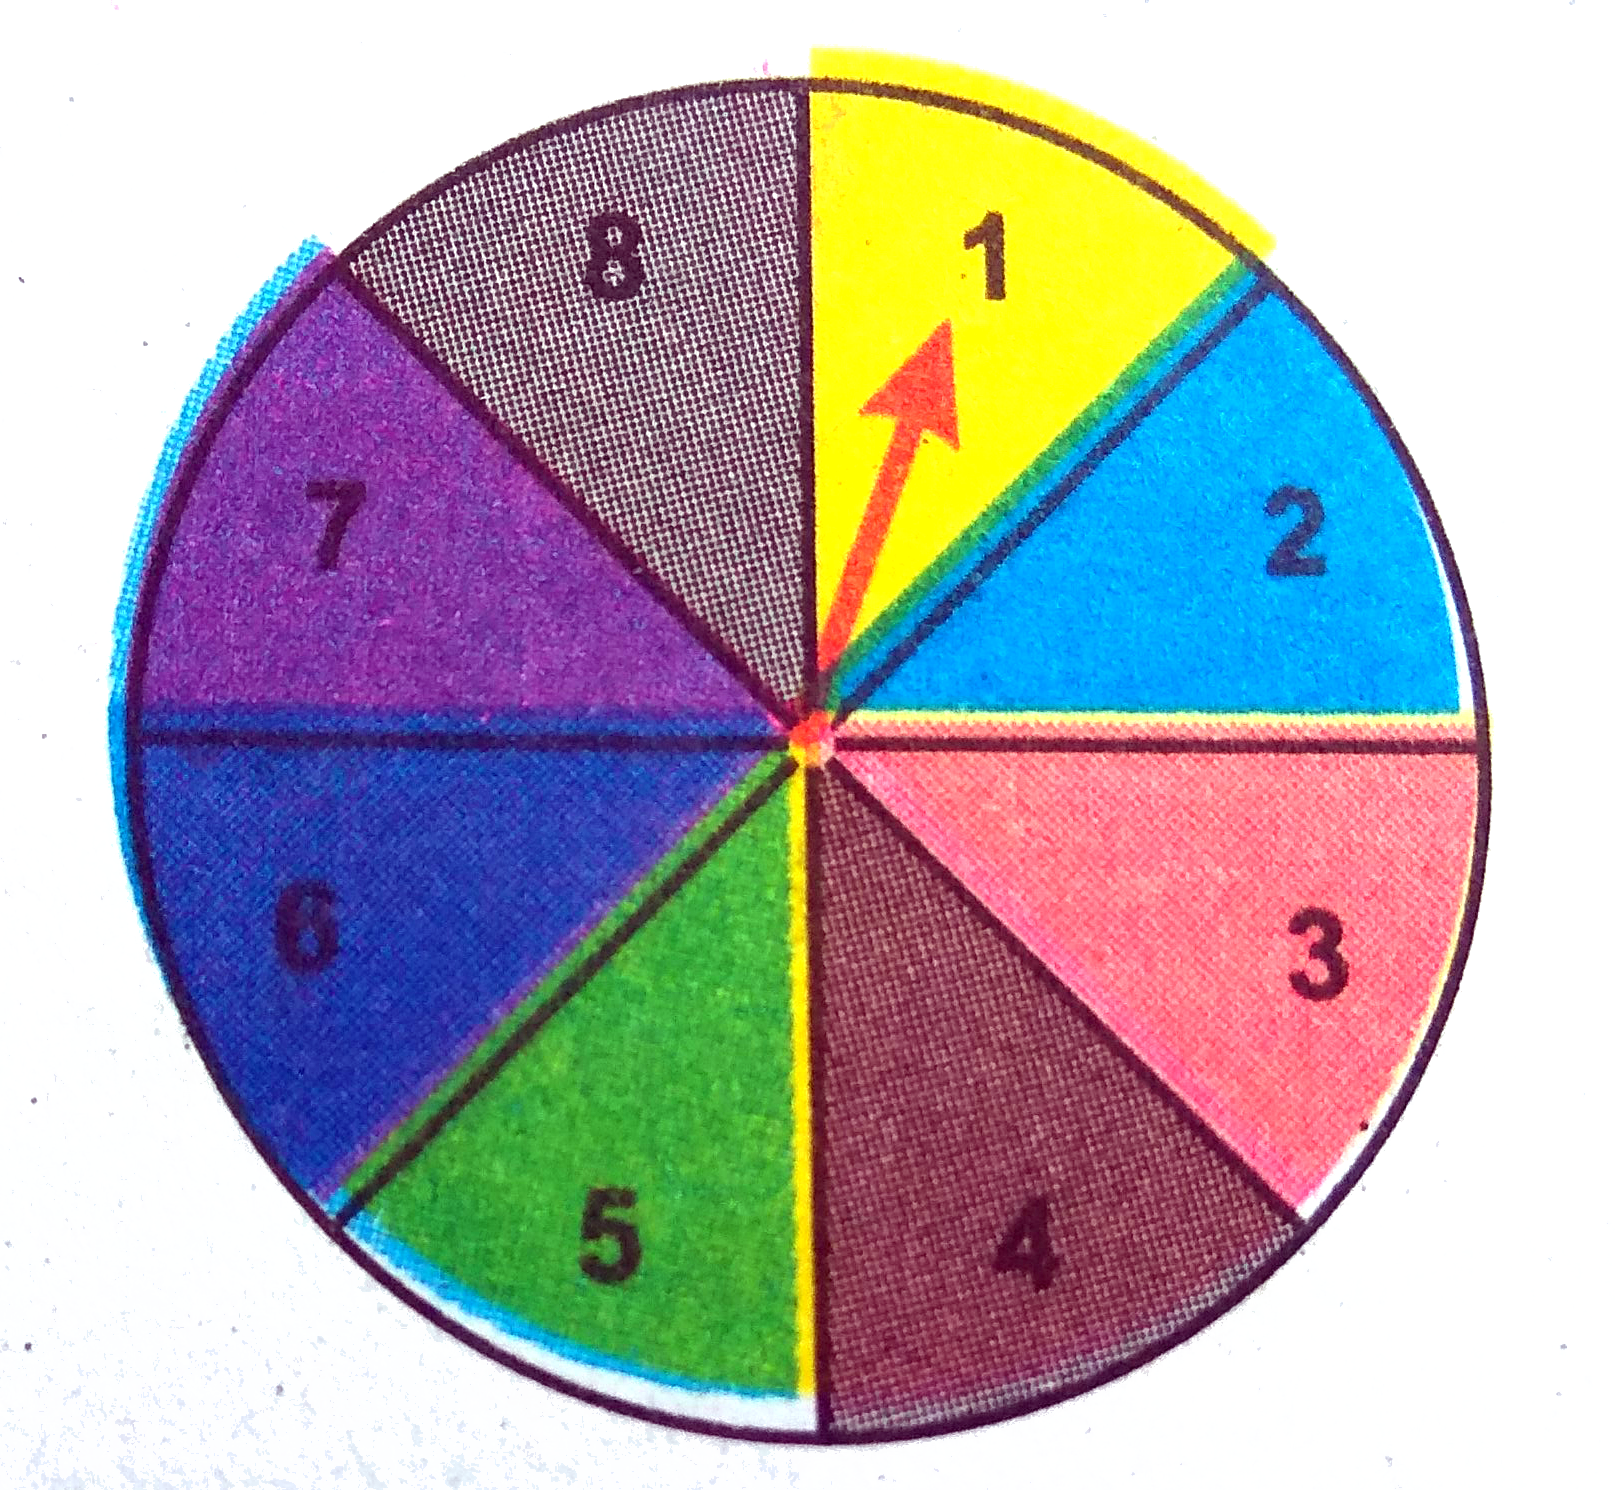 Frame two problems in calculating probability, based on the spinner shown here.